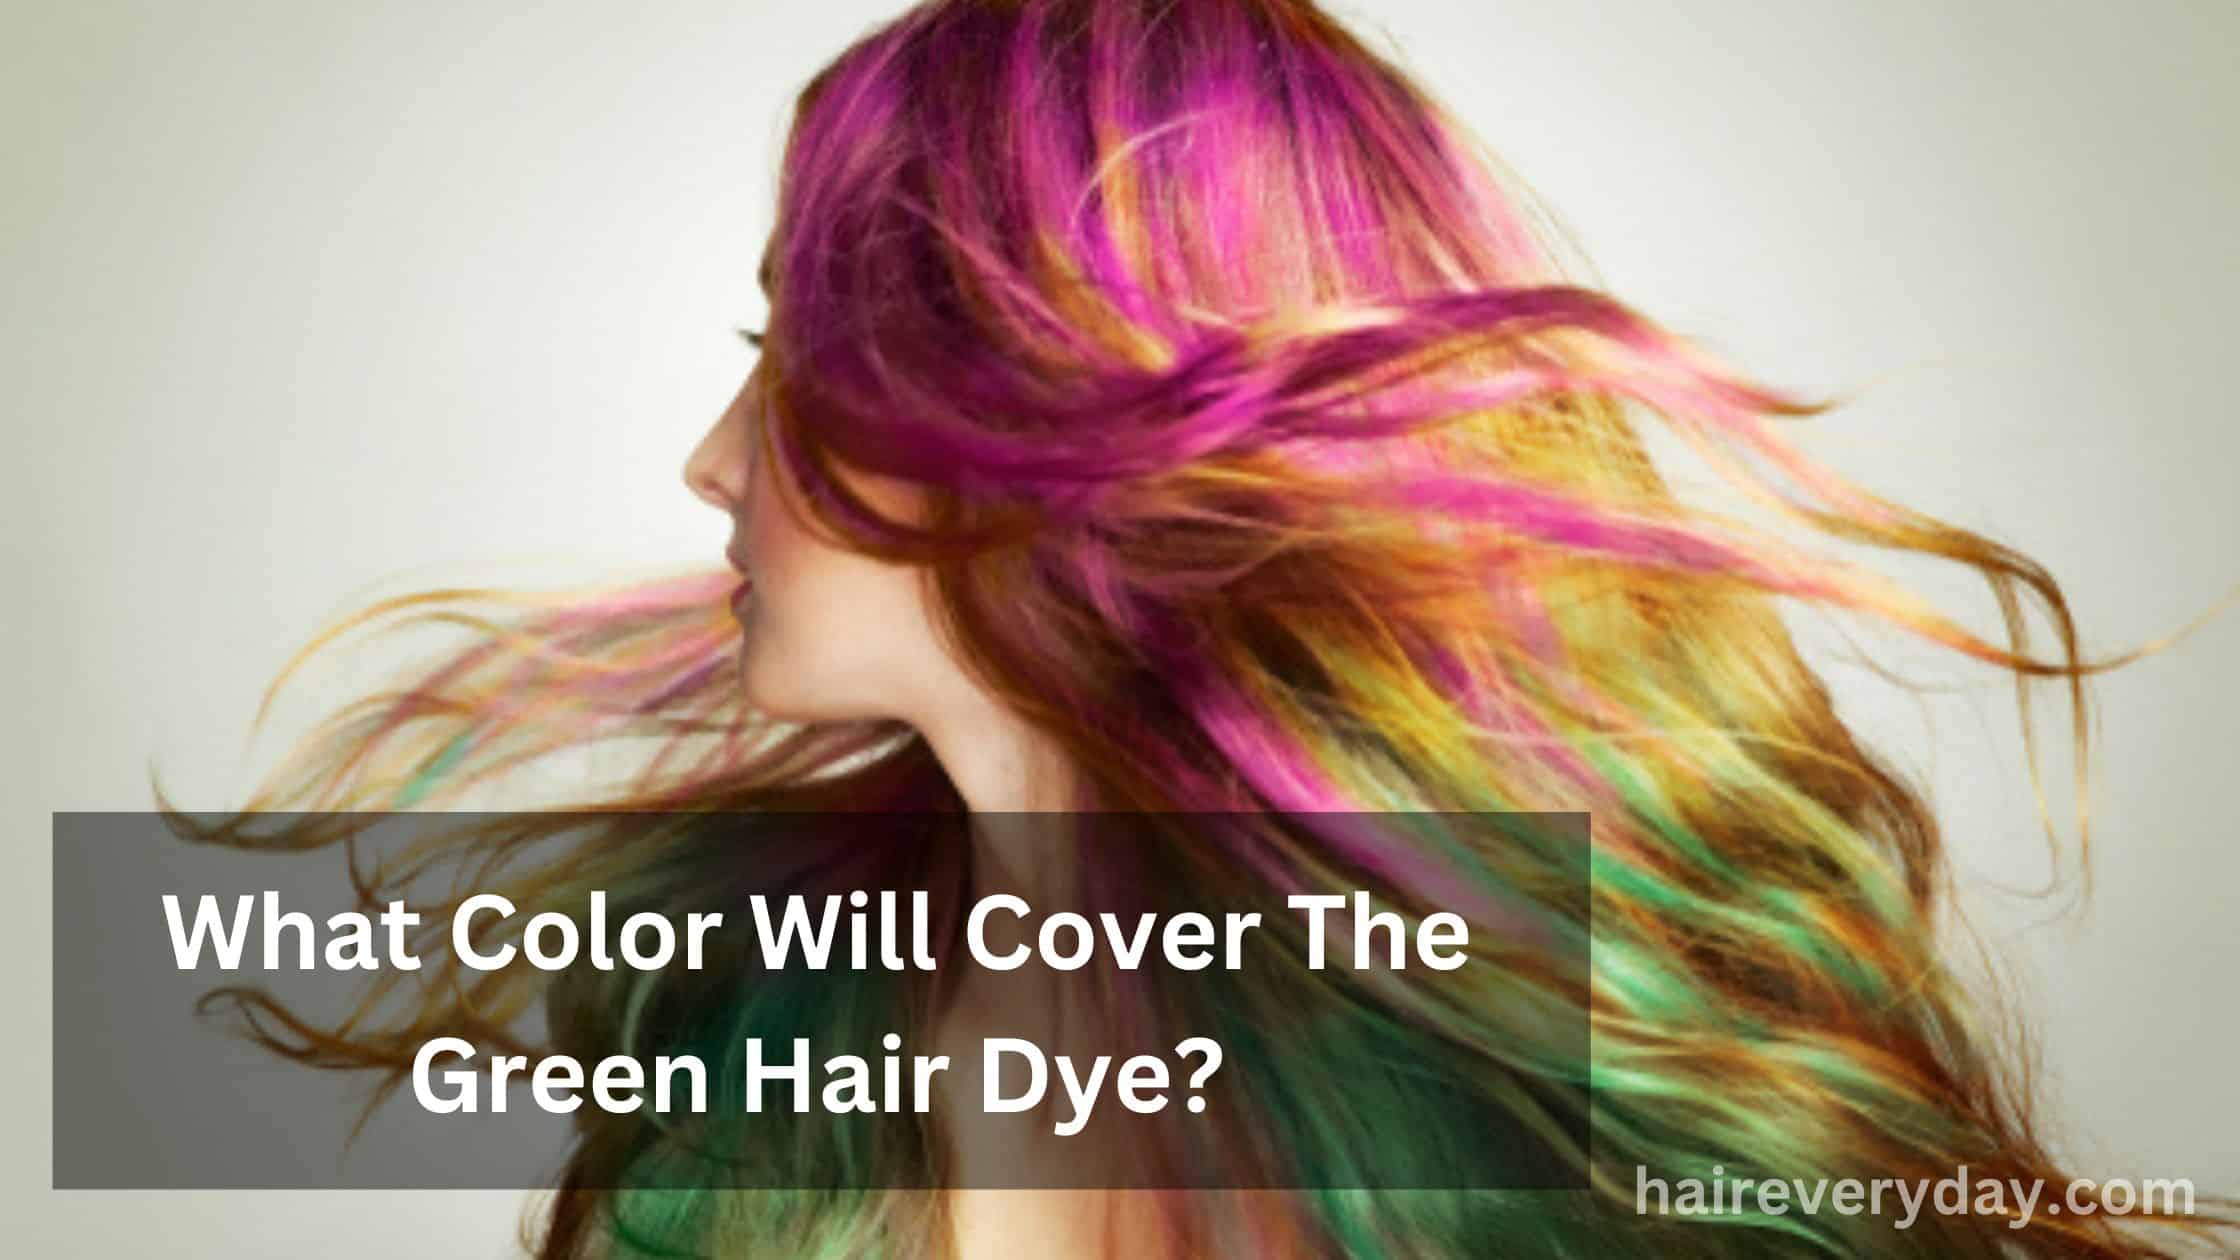 What Color Will Cover The Green Hair Dye? - Hair Everyday Review